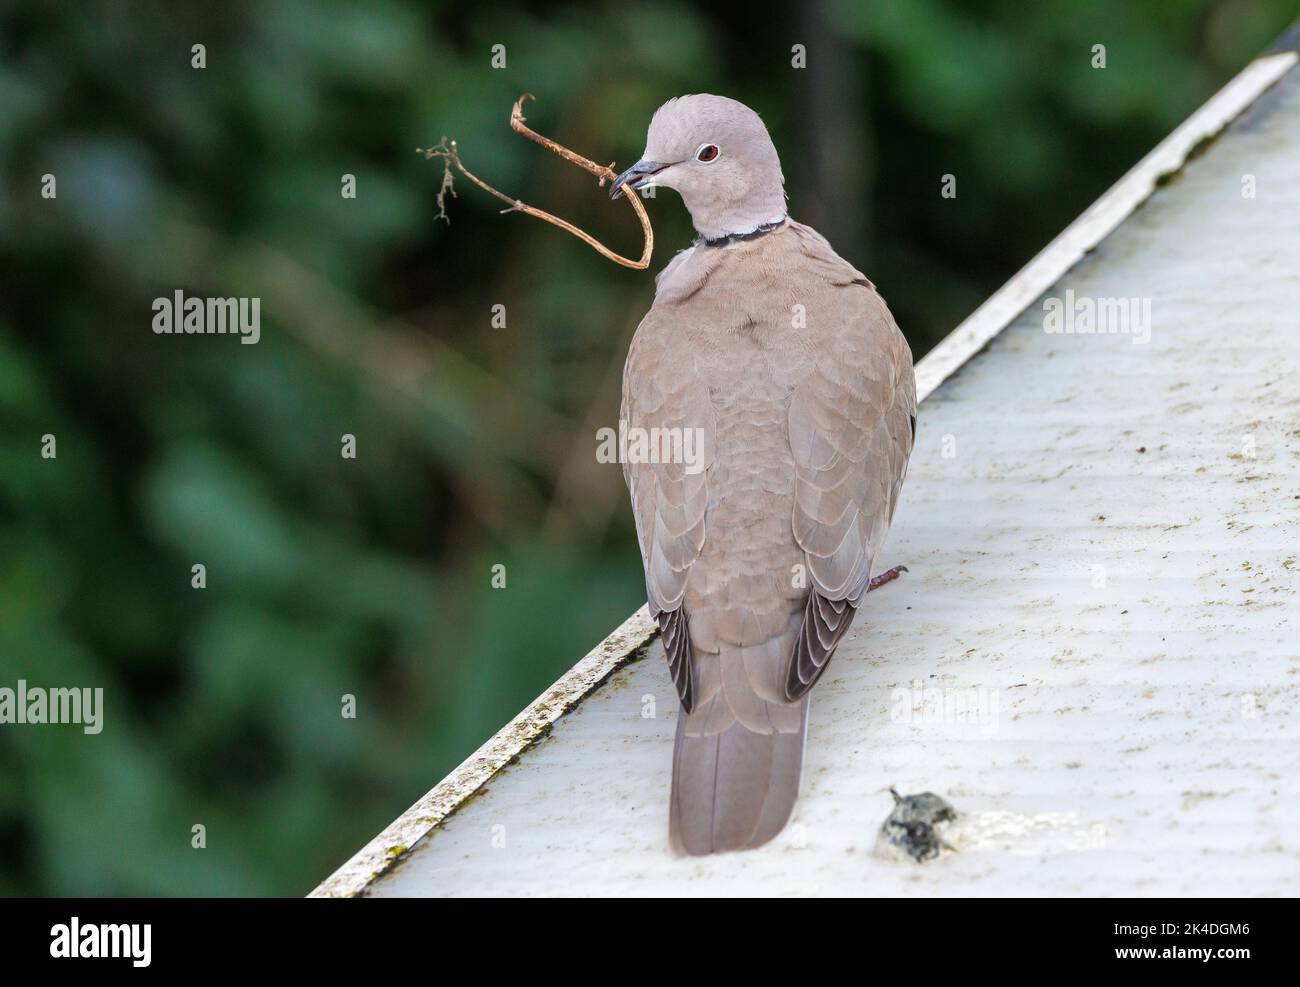 Eurasian collared dove, Streptopelia decaocto, with nesting material, perched on branch close to nest in apple tree. Stock Photo